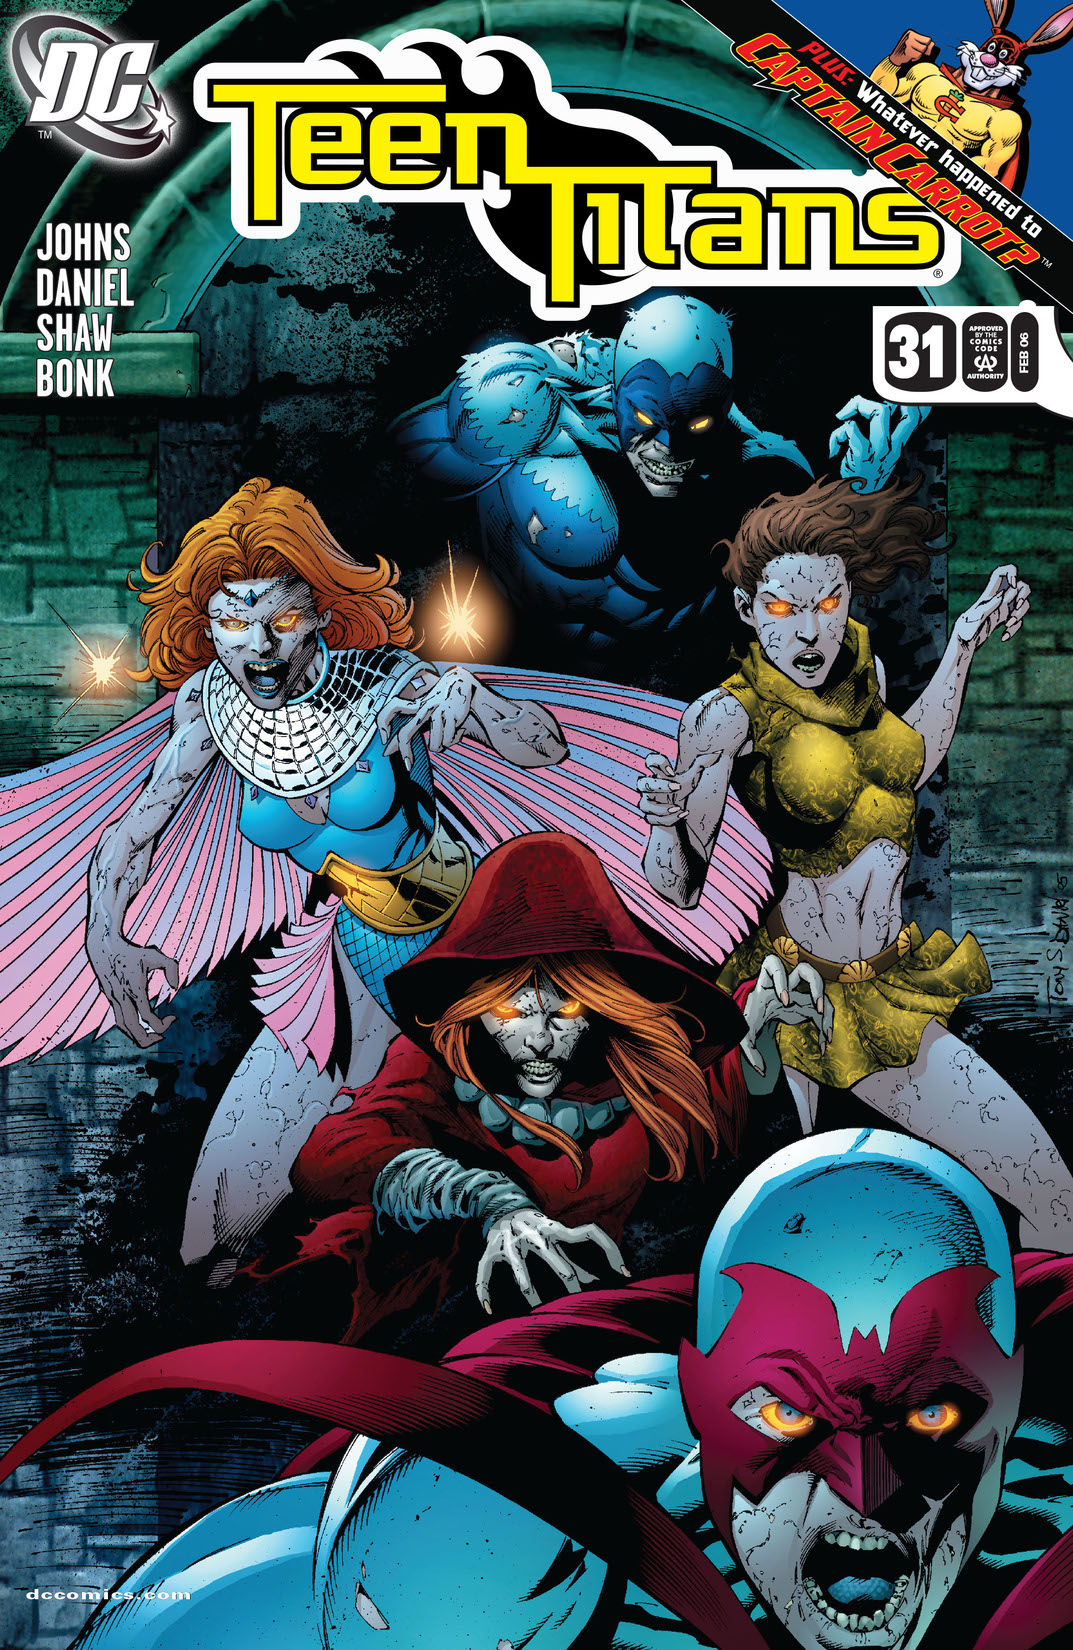 Teen Titans (2003-) #31 preview images